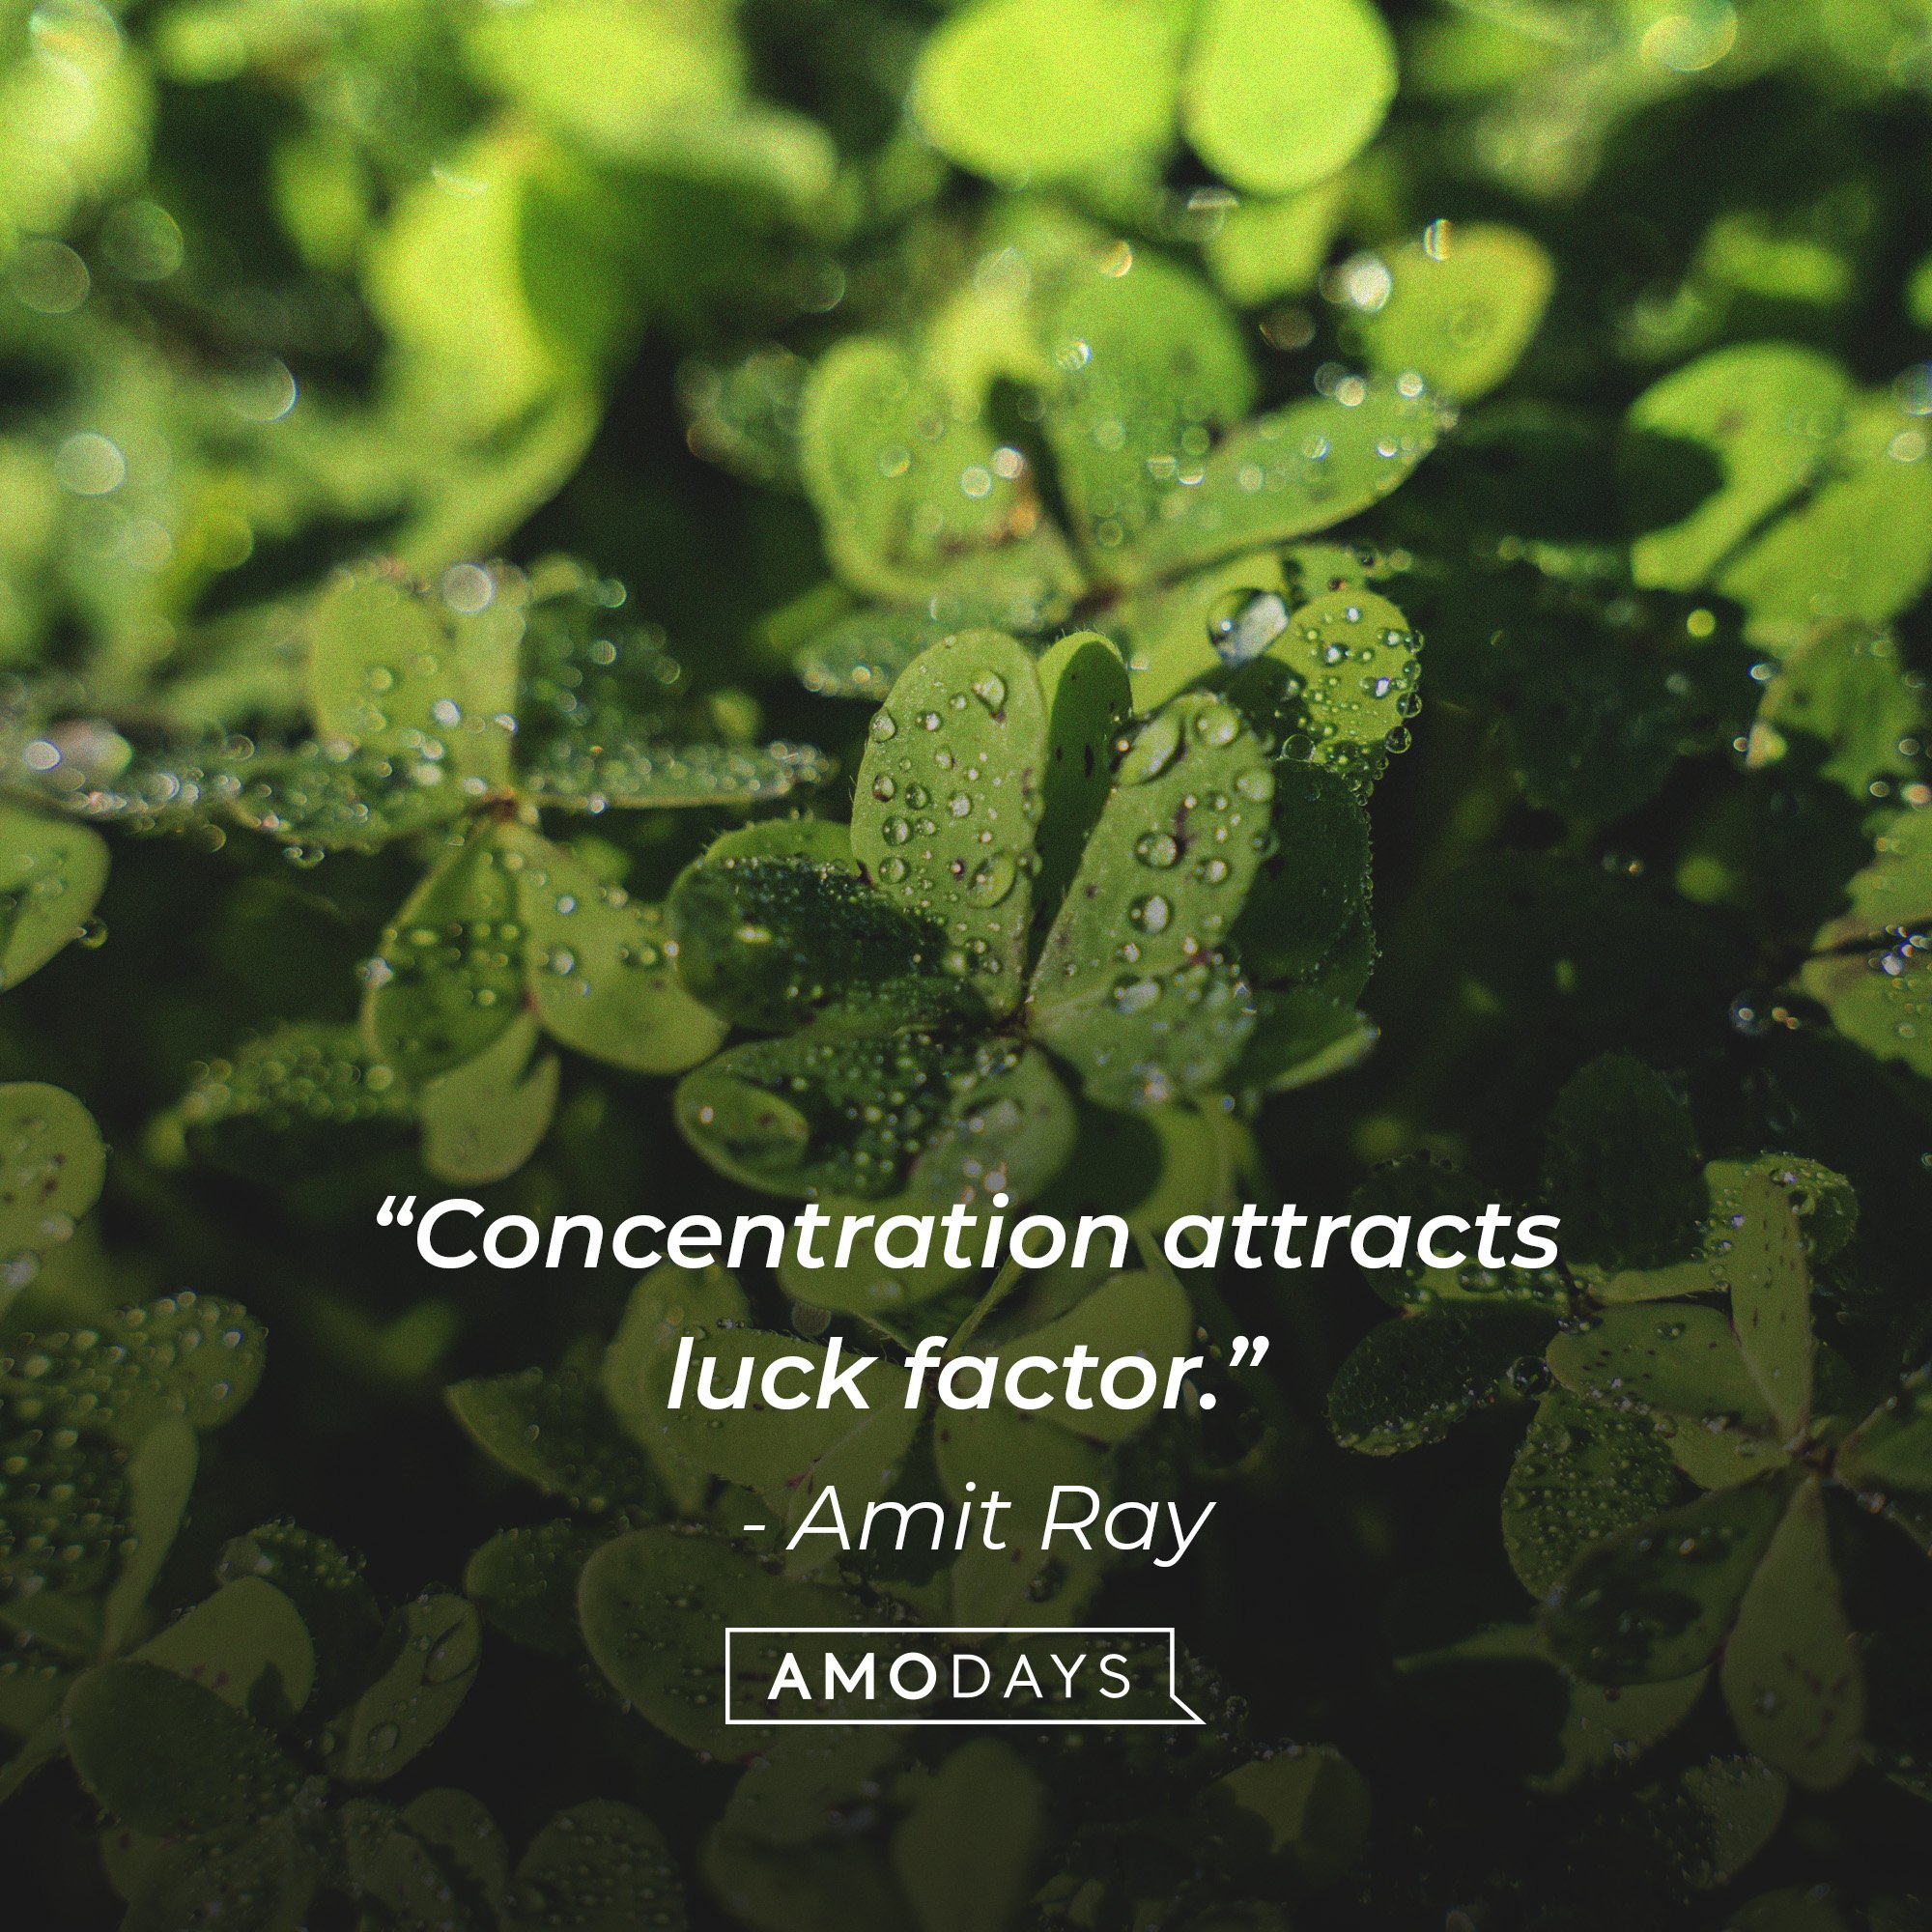  Amit Ray's quote: “Concentration attracts luck factor.” | Image: AmoDays